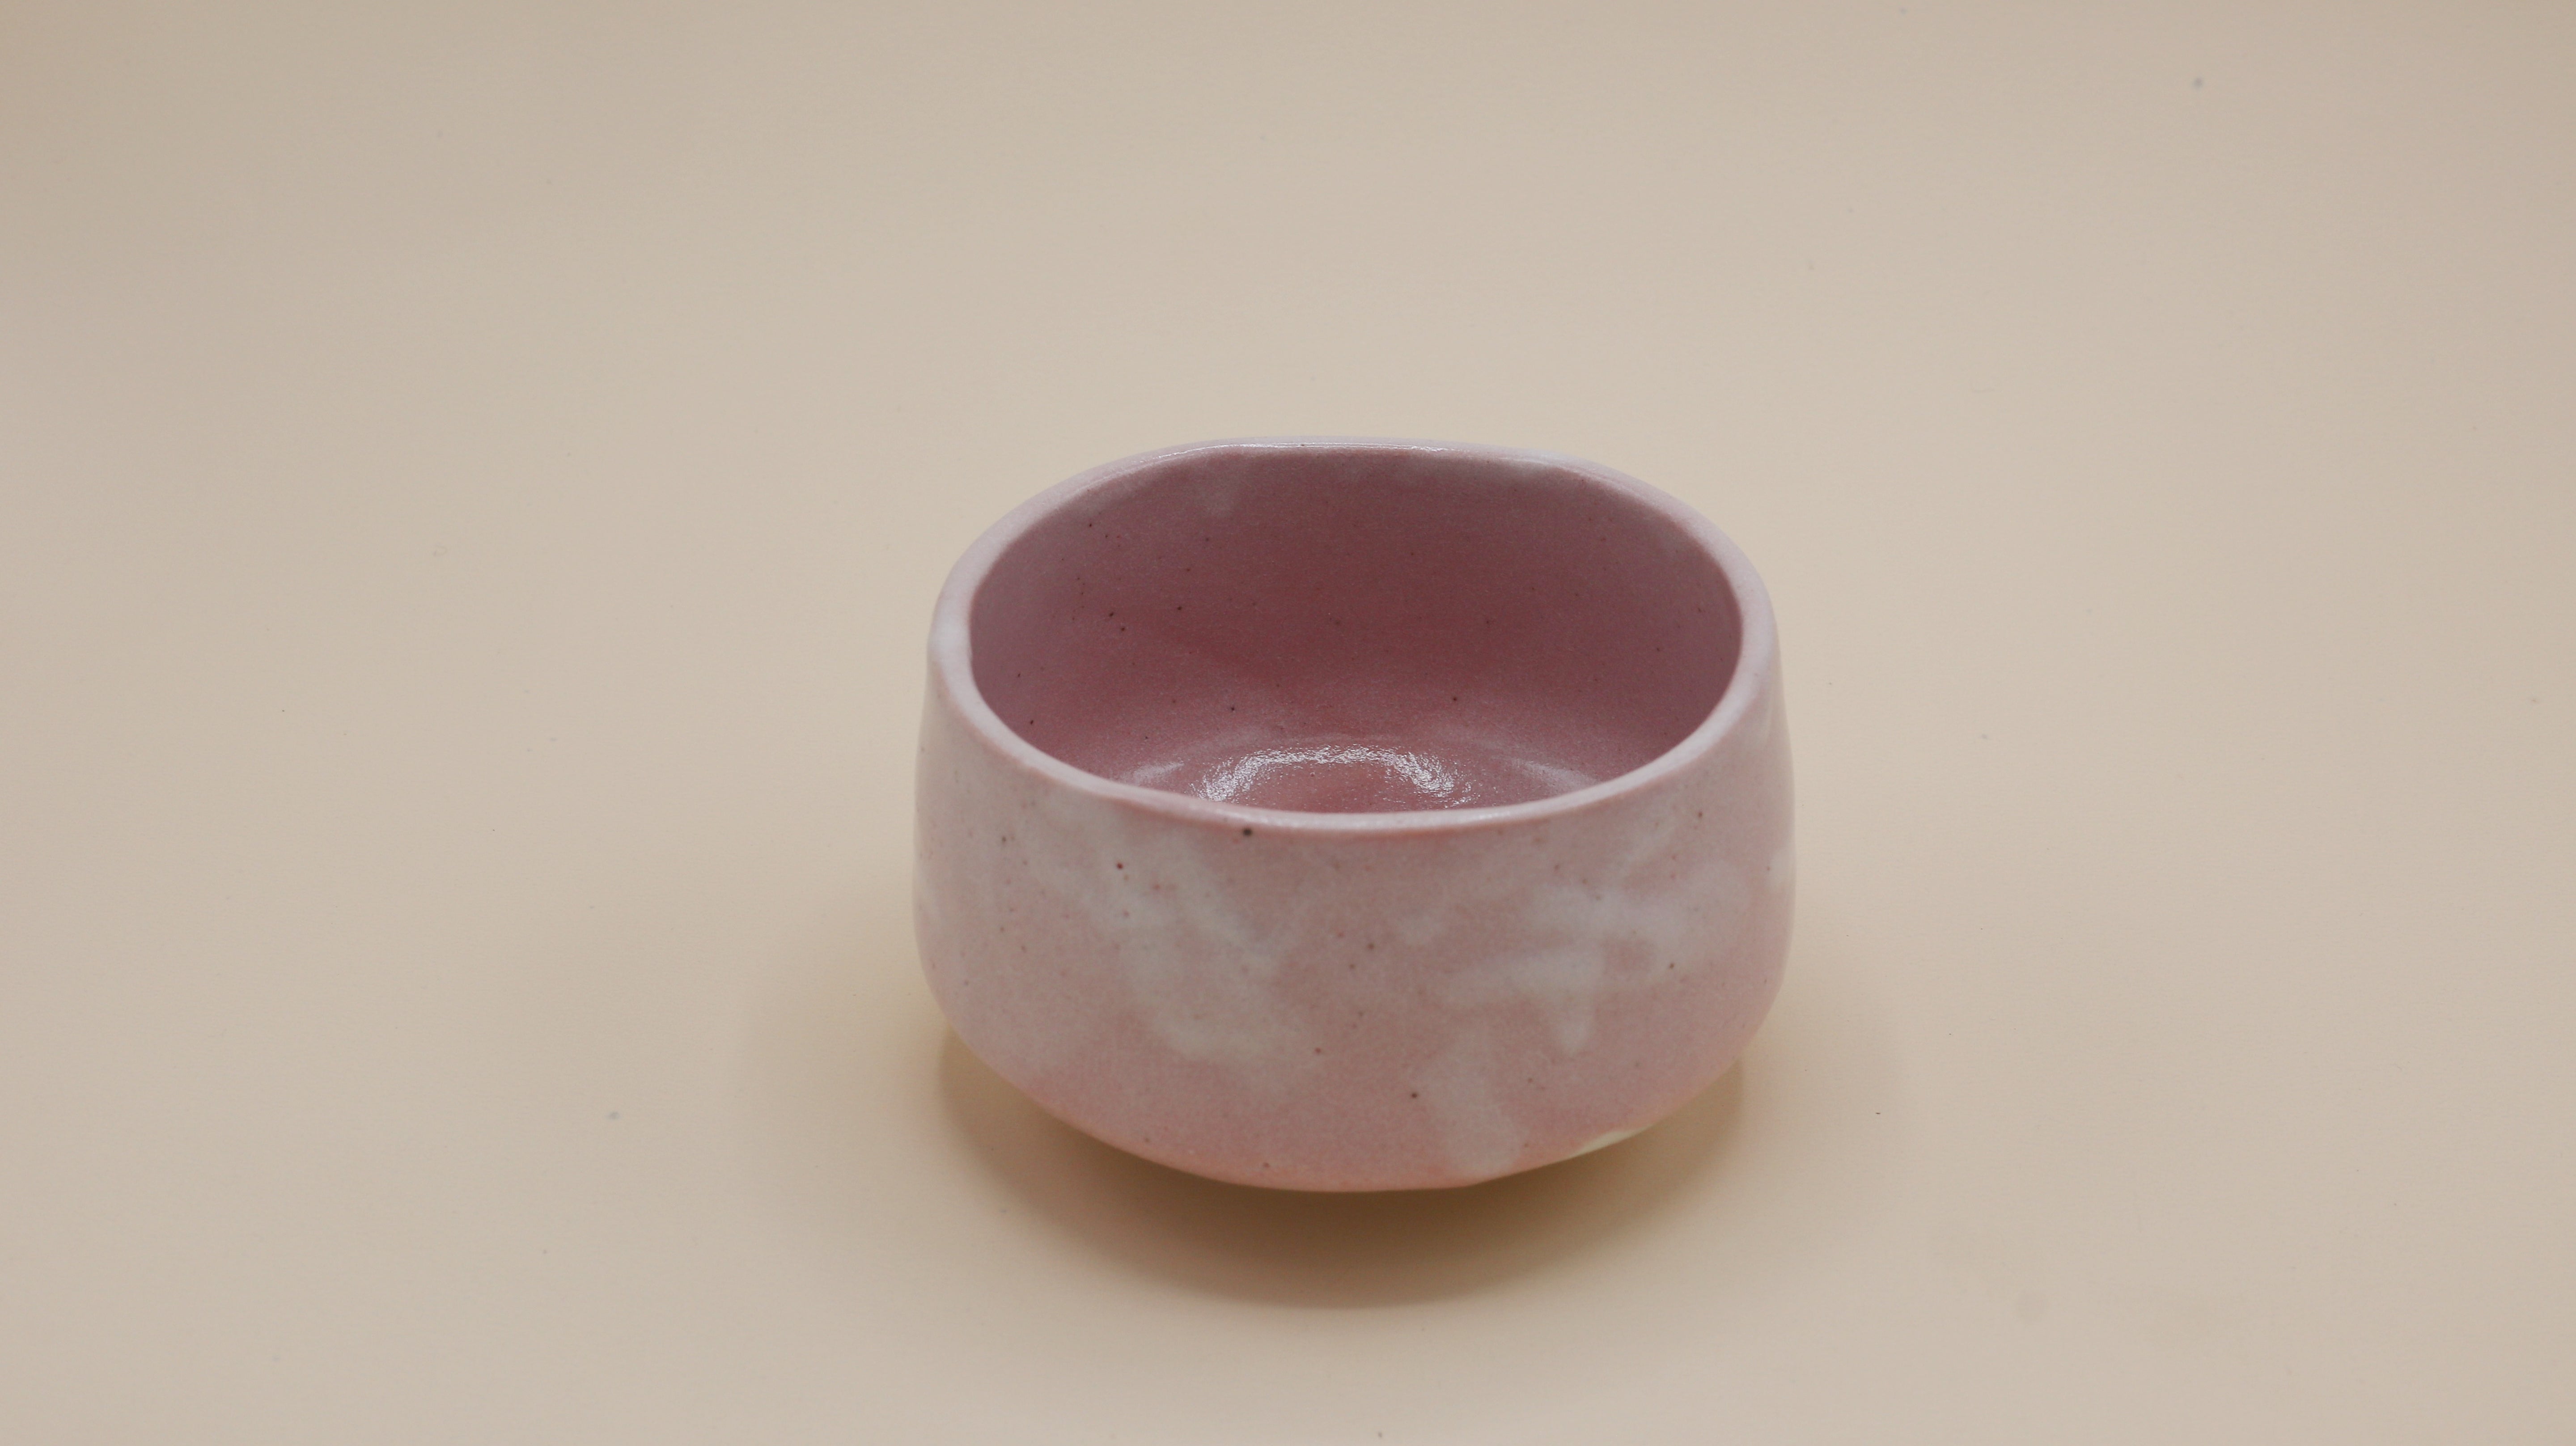 Pink matcha cup with white details